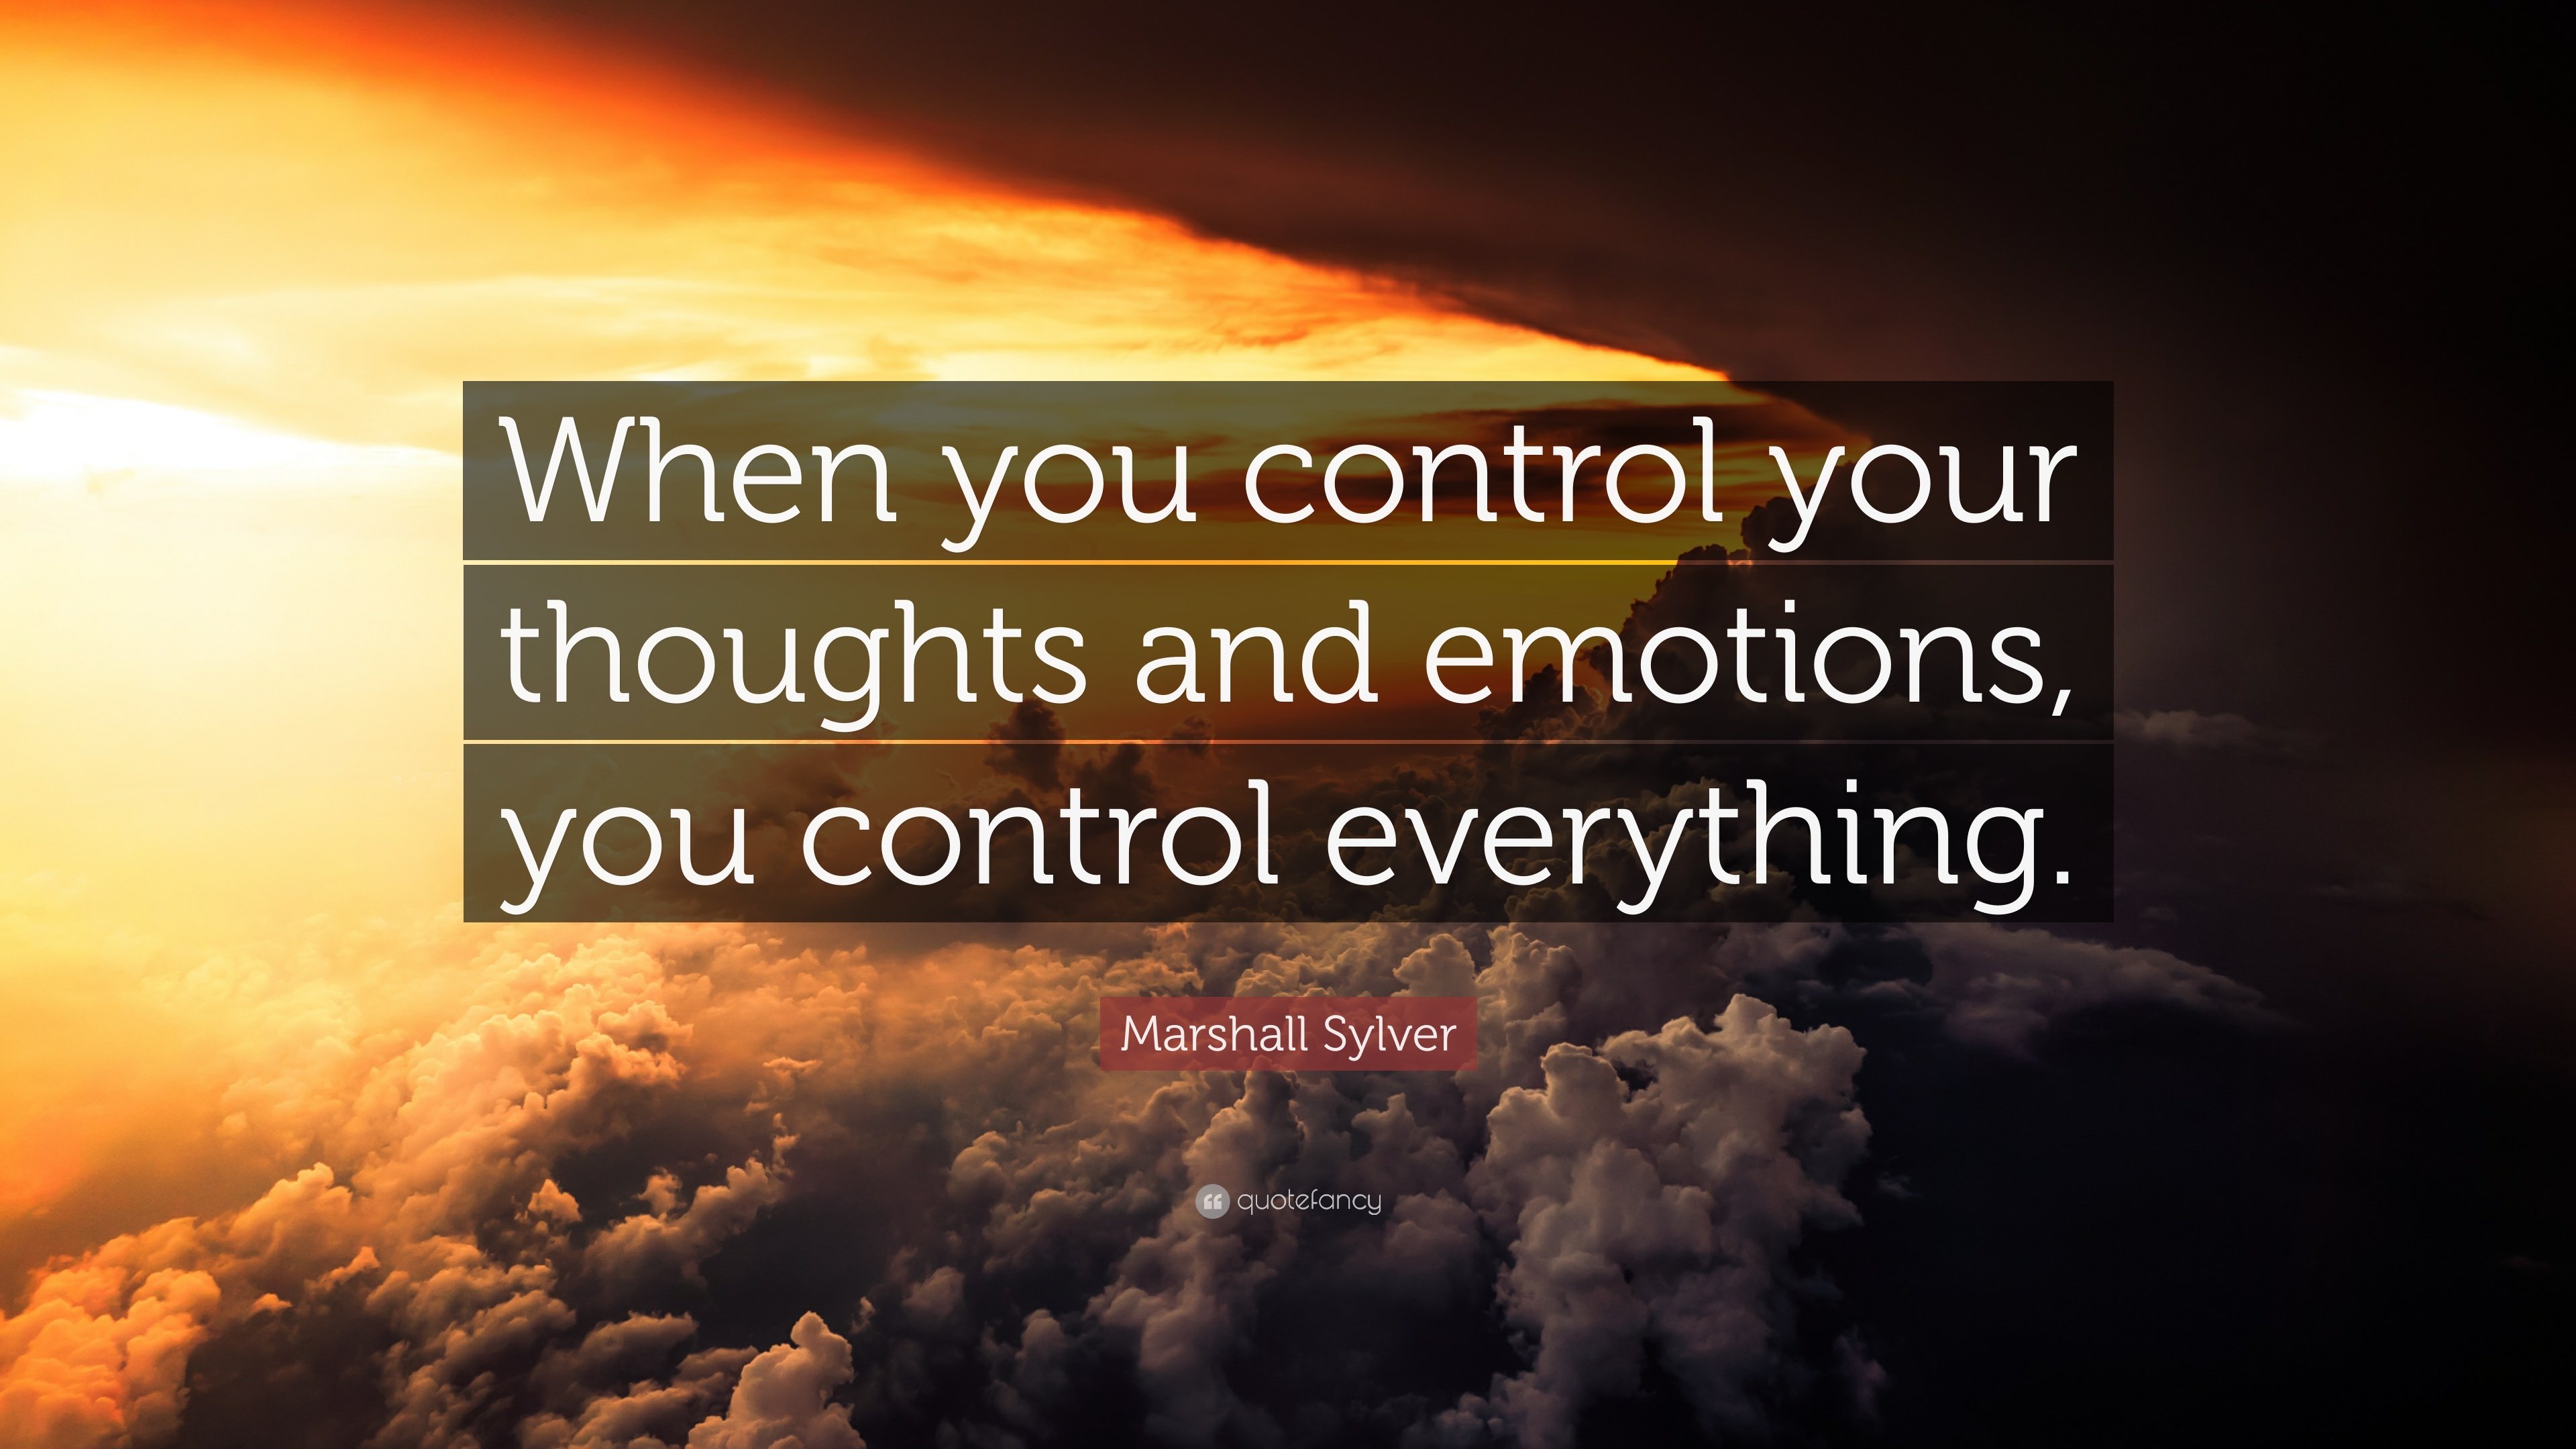 Marshall Sylver Quote: “When you control your thoughts and emotions, you control everything.” (12 wallpaper)